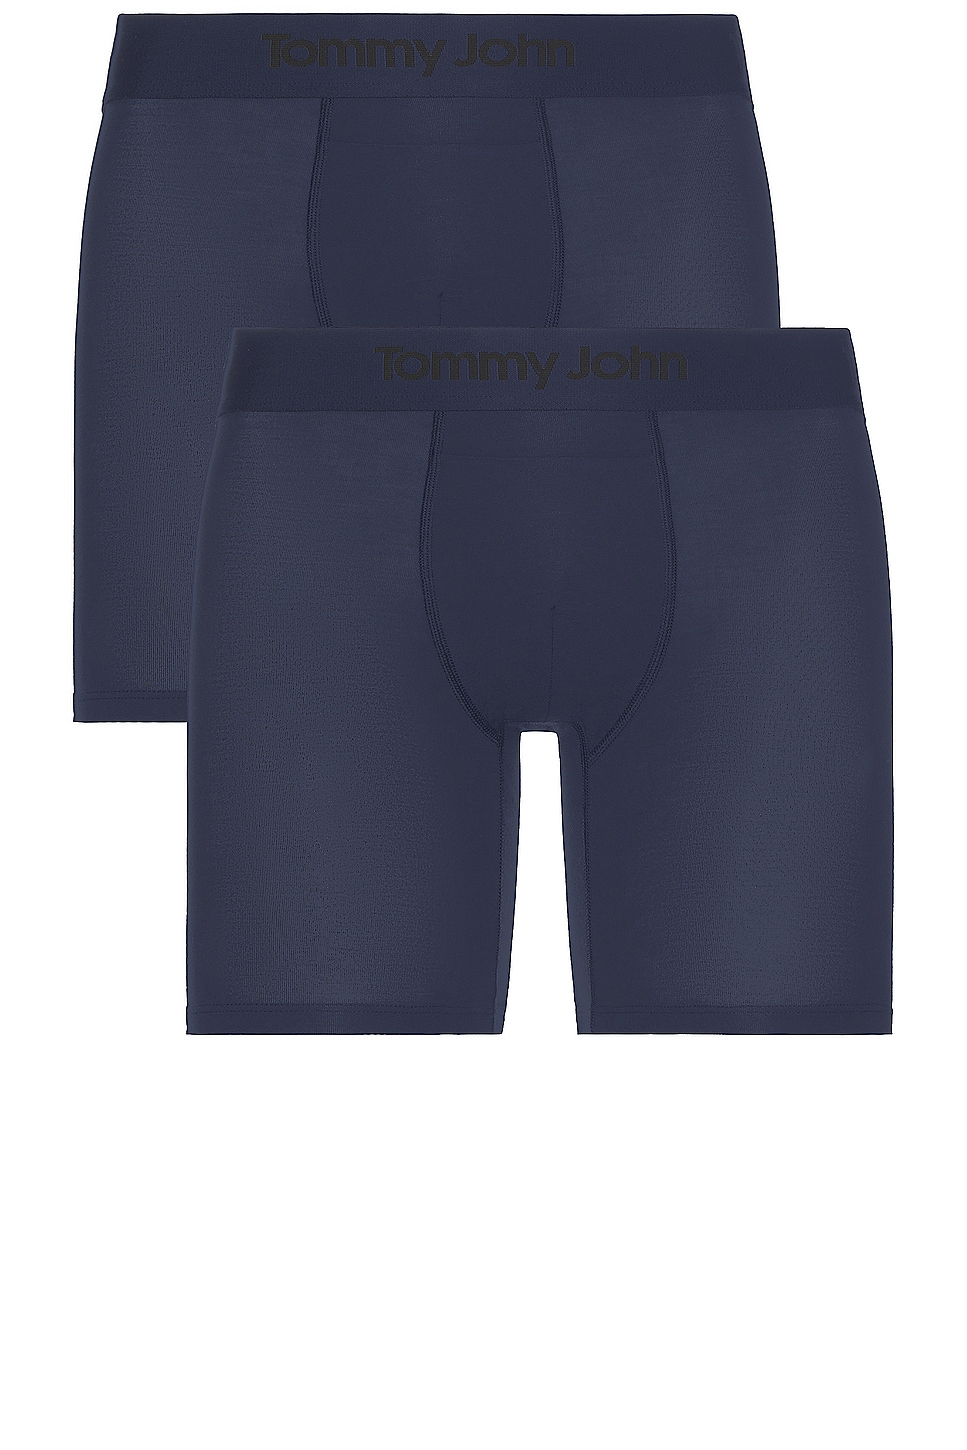 Tommy John 2 Pack Boxer Brief 6 in Black & Dress Blues